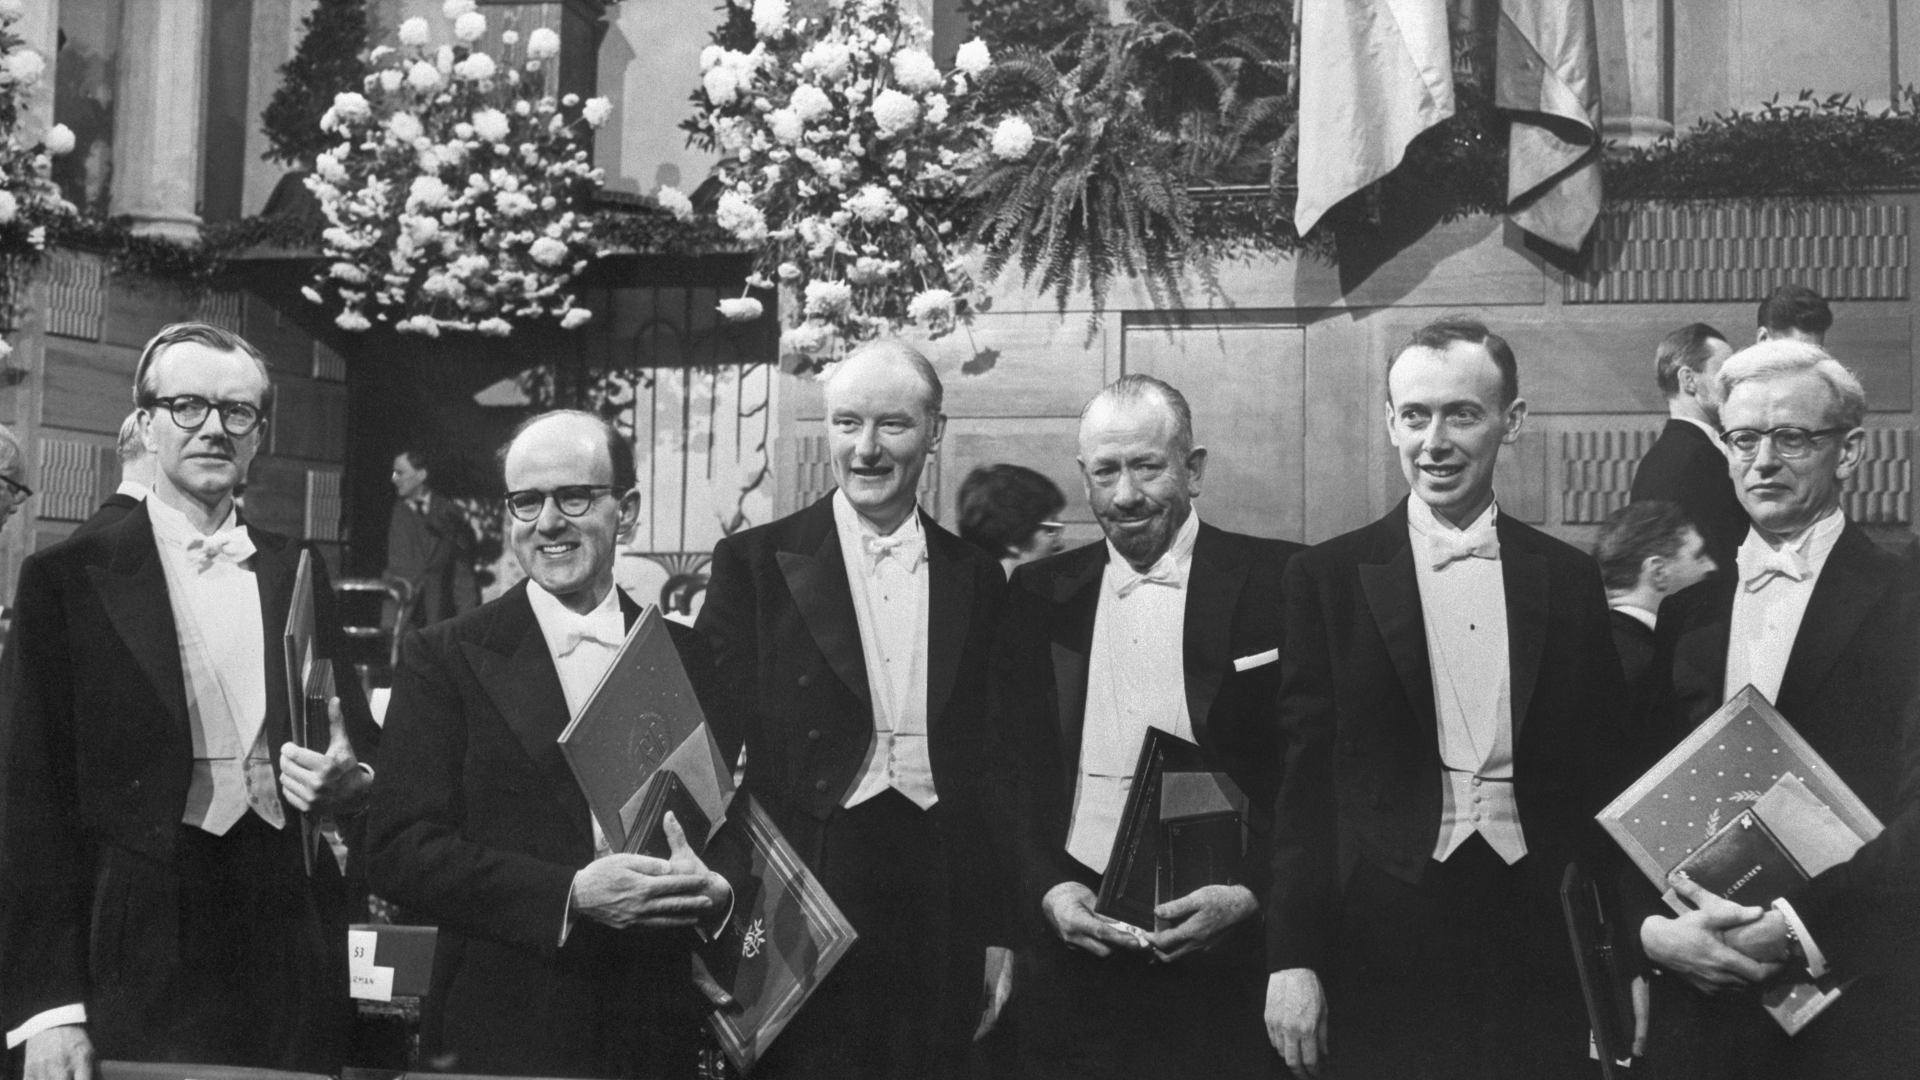 The 1962 Nobel Prize winners, from left to right: Professor Maurice H. Wilkins (Medicine); Dr. Max Perutz (Chemistry); Dr. Francis Crick (Medicine); author John Steinbeck (literature); Prof. James D. Watson (Medicine); and Dr. John Kendrew (Chemistry).